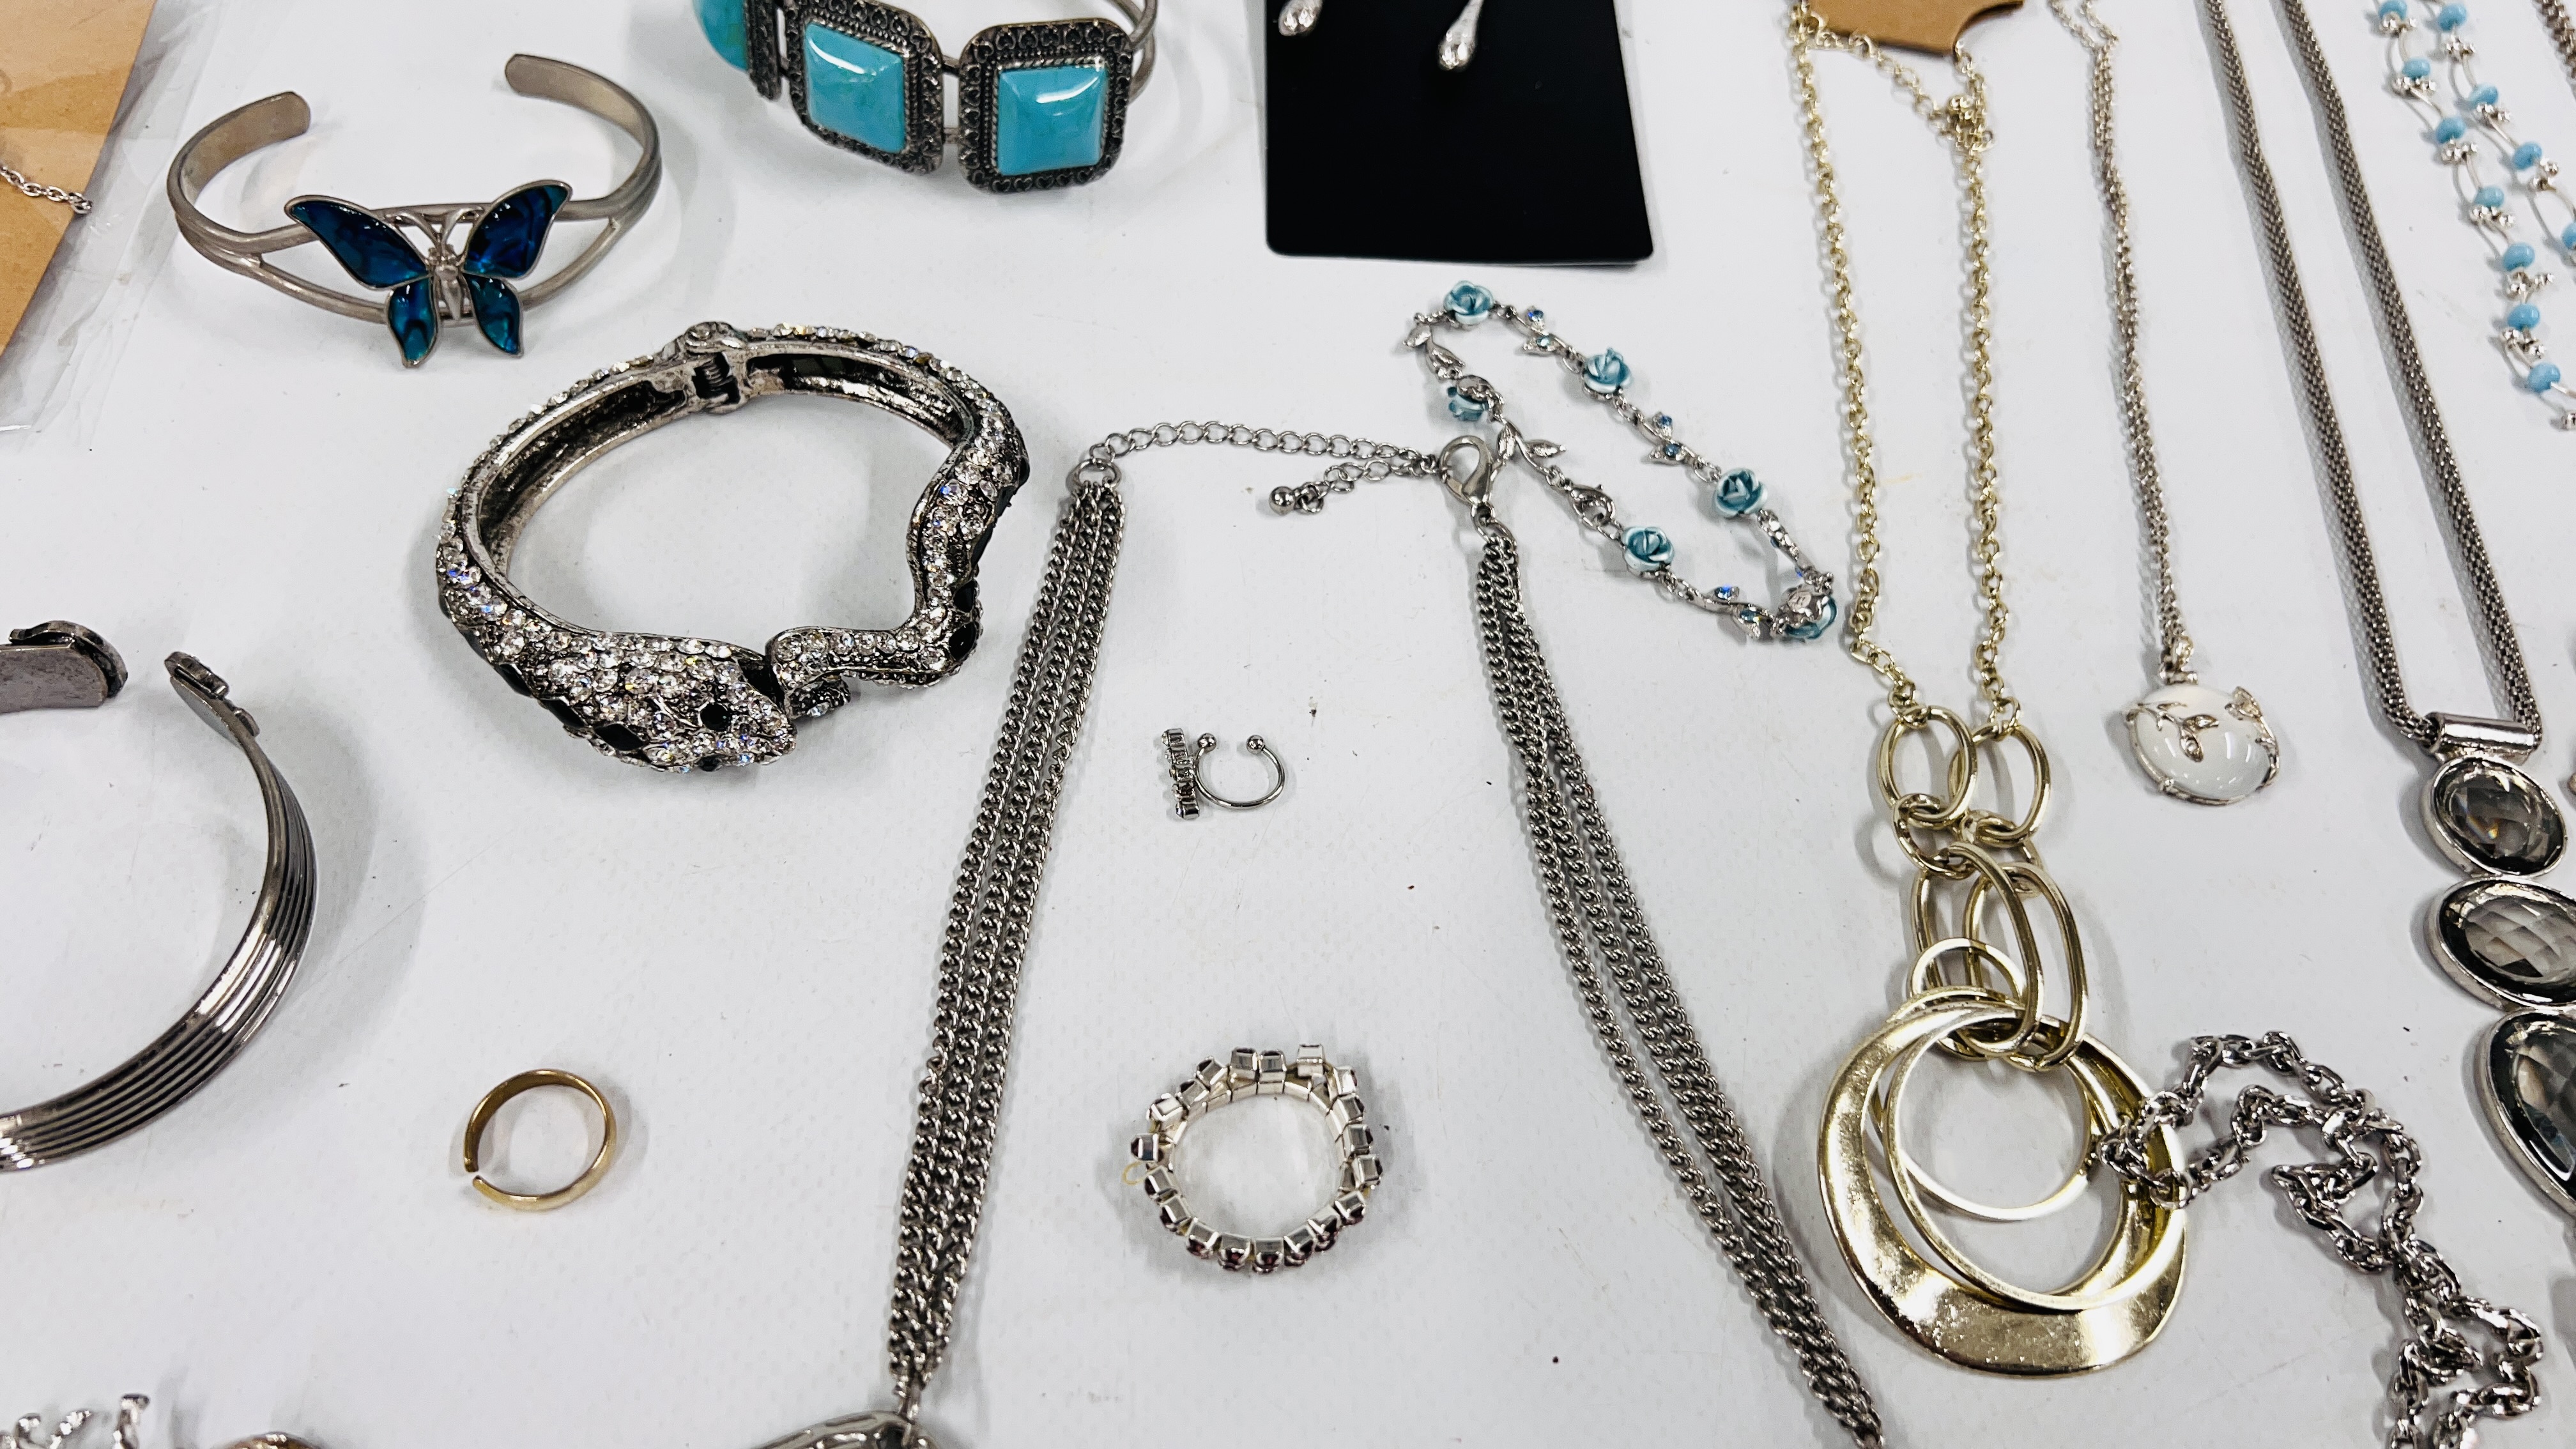 SELECTION OF SILVERTONE COSTUME JEWELLERY ALONG WITH A JEWELLERY BOX FULL OF BEADED NECKLACES. - Image 6 of 12